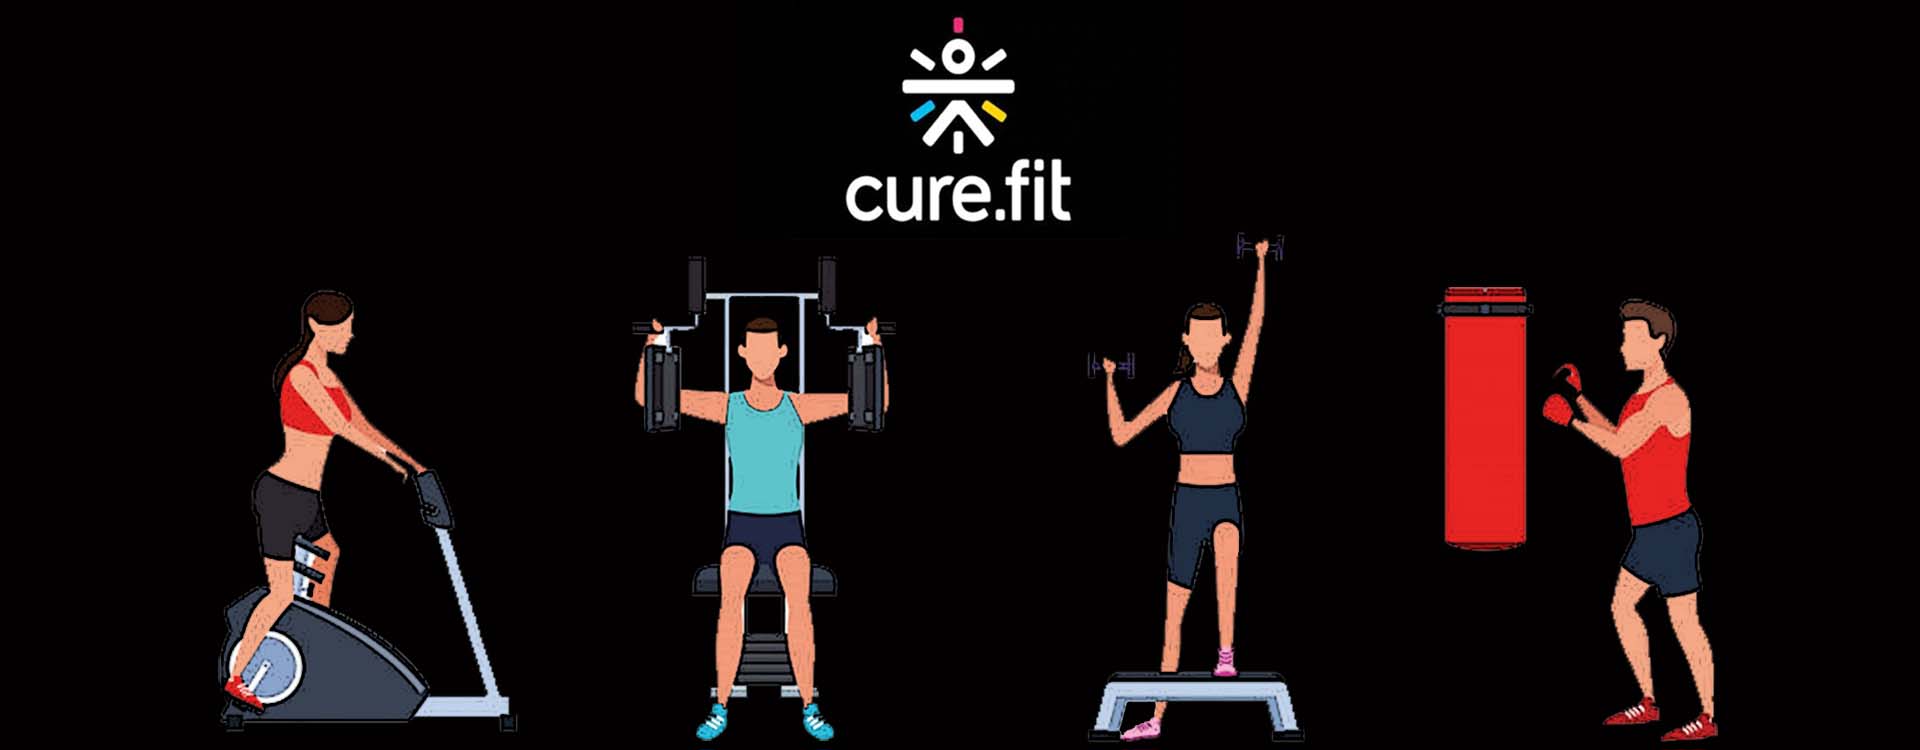 This is how CureFit is cornering the modern fitness market